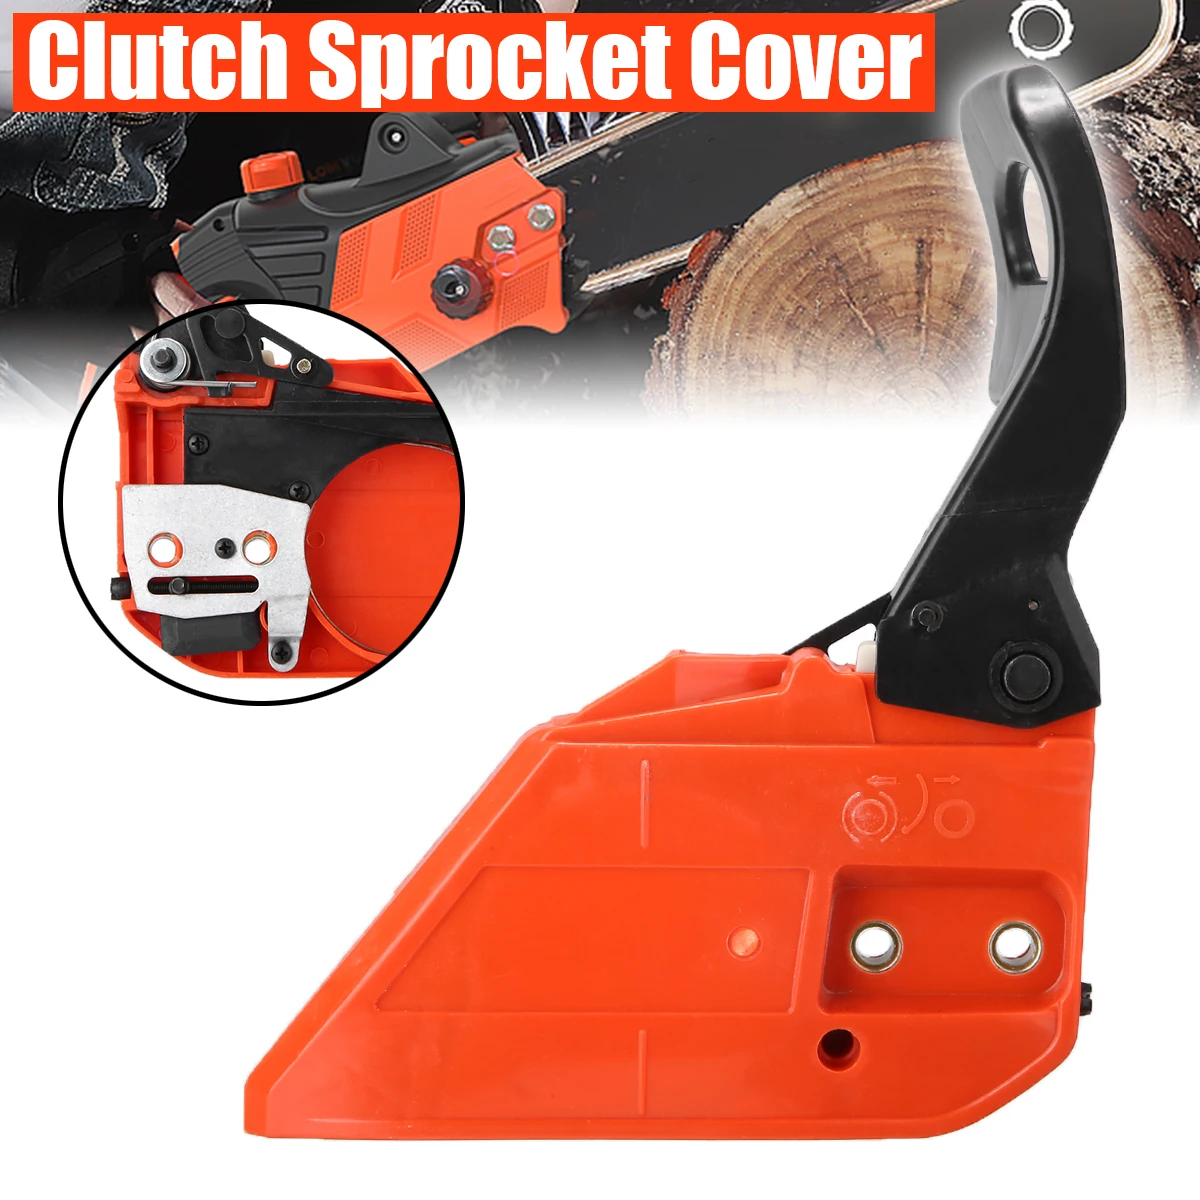 Clutch Sprocket Chain Cover Brake Handle Clutch Cover Fit for for Chinese Chainsaw 4500 5200 5800 5900 Replacement